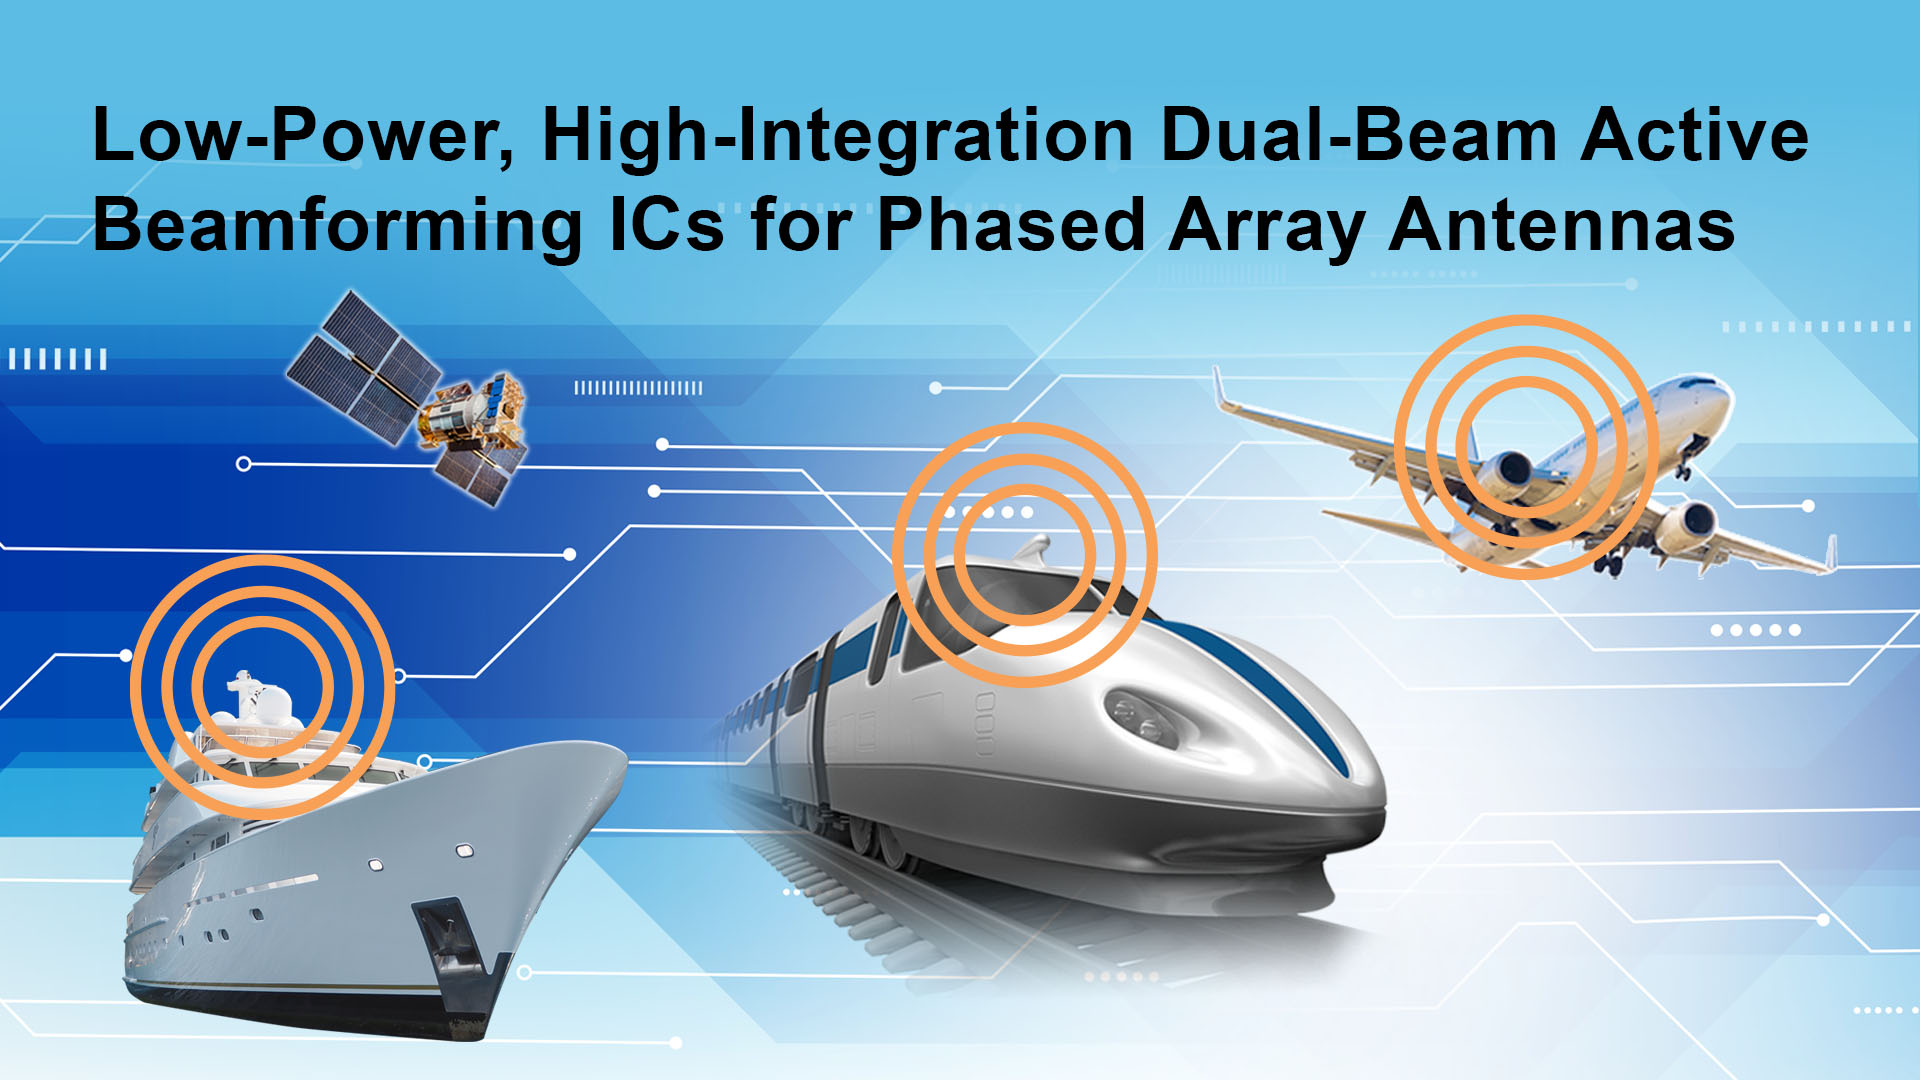 First Commercial Dual-Beam Active Beamforming ICs for Satcom Systems